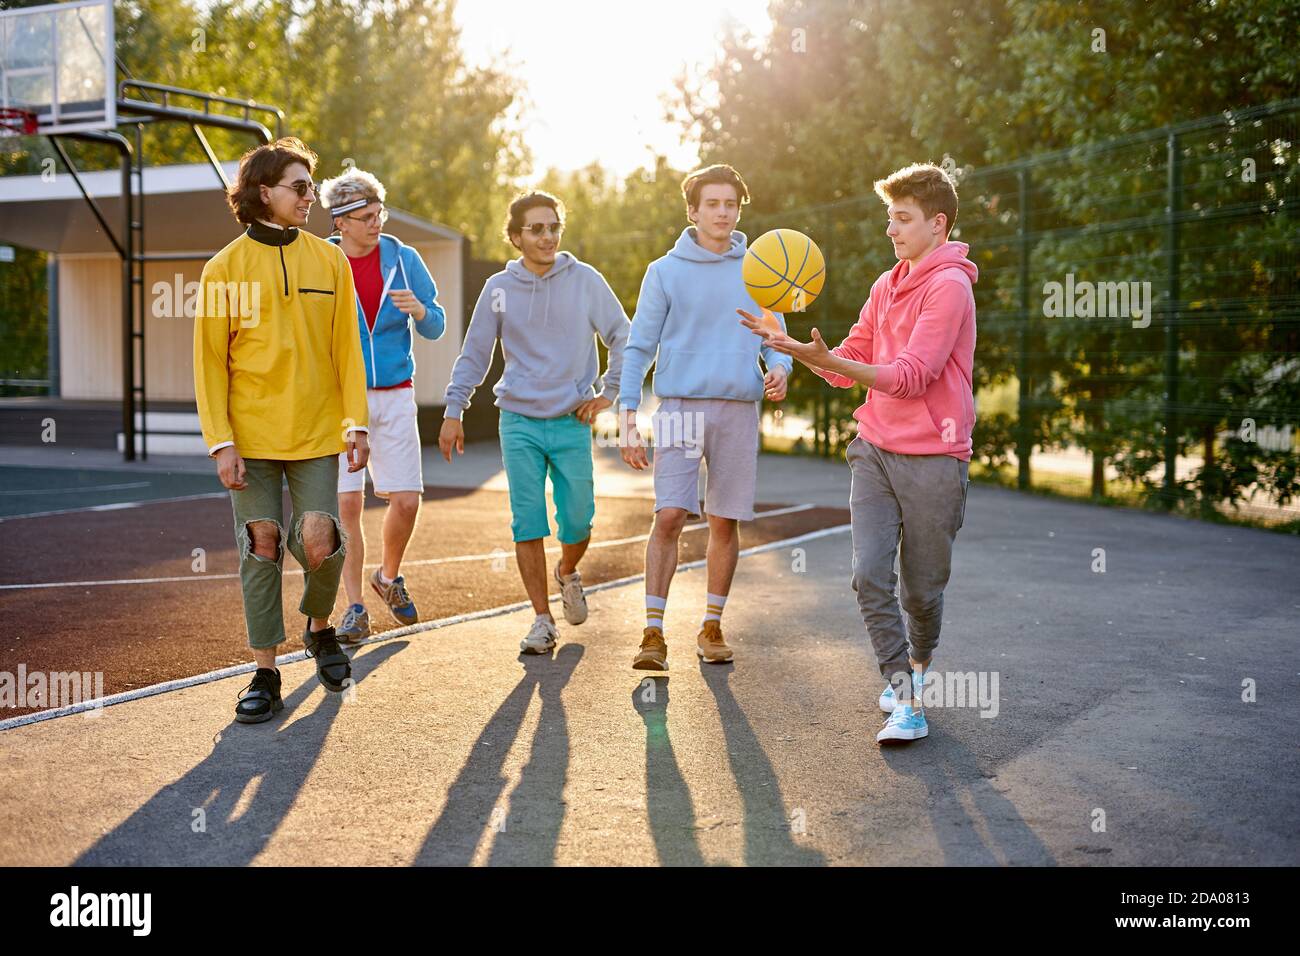 diverse young city boys are ready to play basketball together, sport club members have fun outdoors, in casual wear. portrait Stock Photo